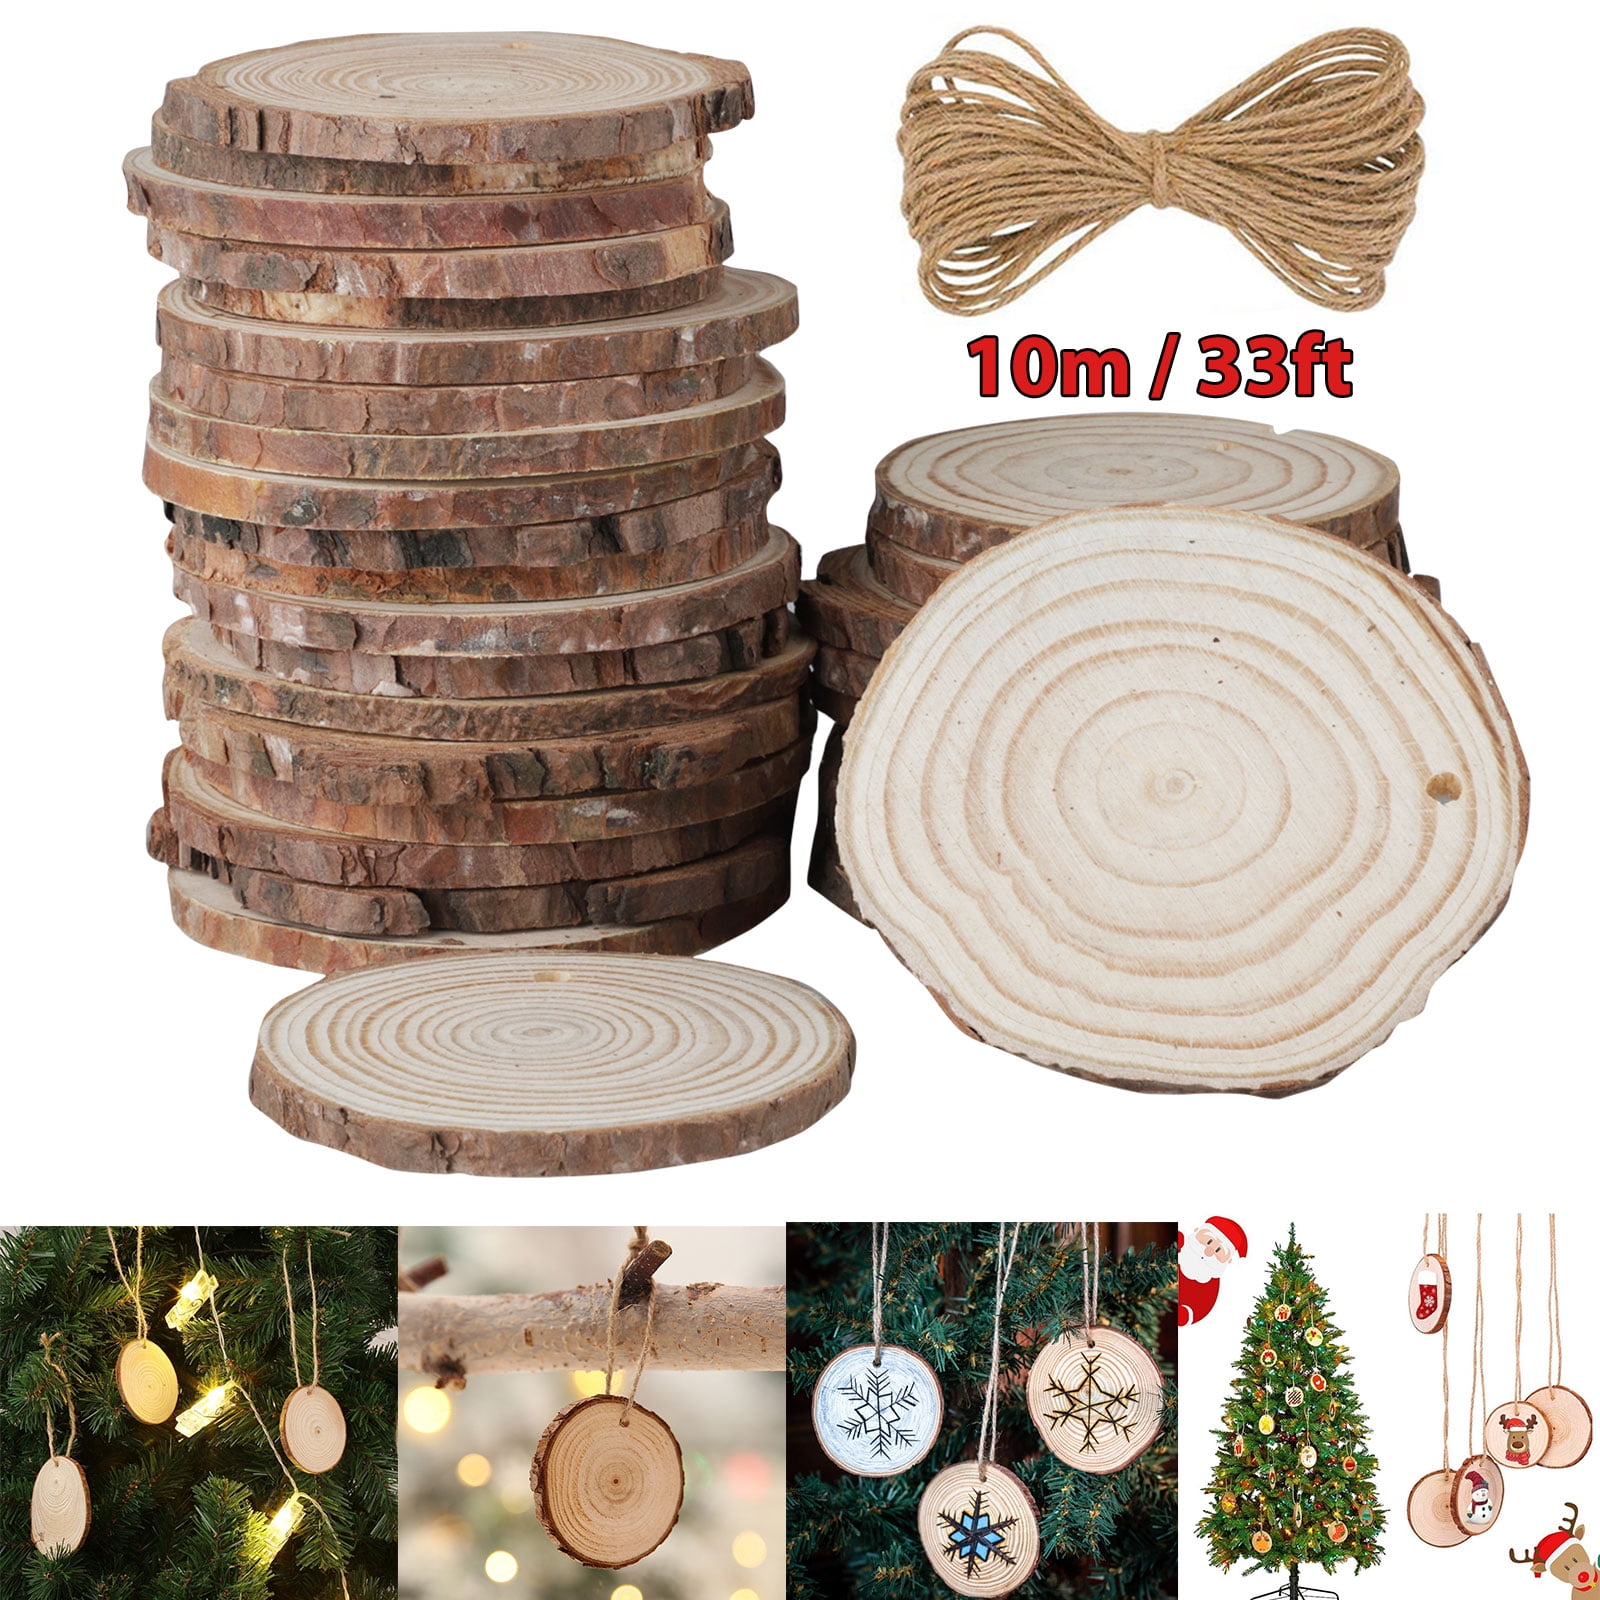 Wedding Ornaments DIY Craft 20Pcs Natural Wood Slices 2.36-2.7 inches Predrilled Unfinished Log Wooden Circles with Holes and Bark forChristmas Decoration Includes Jute Twines